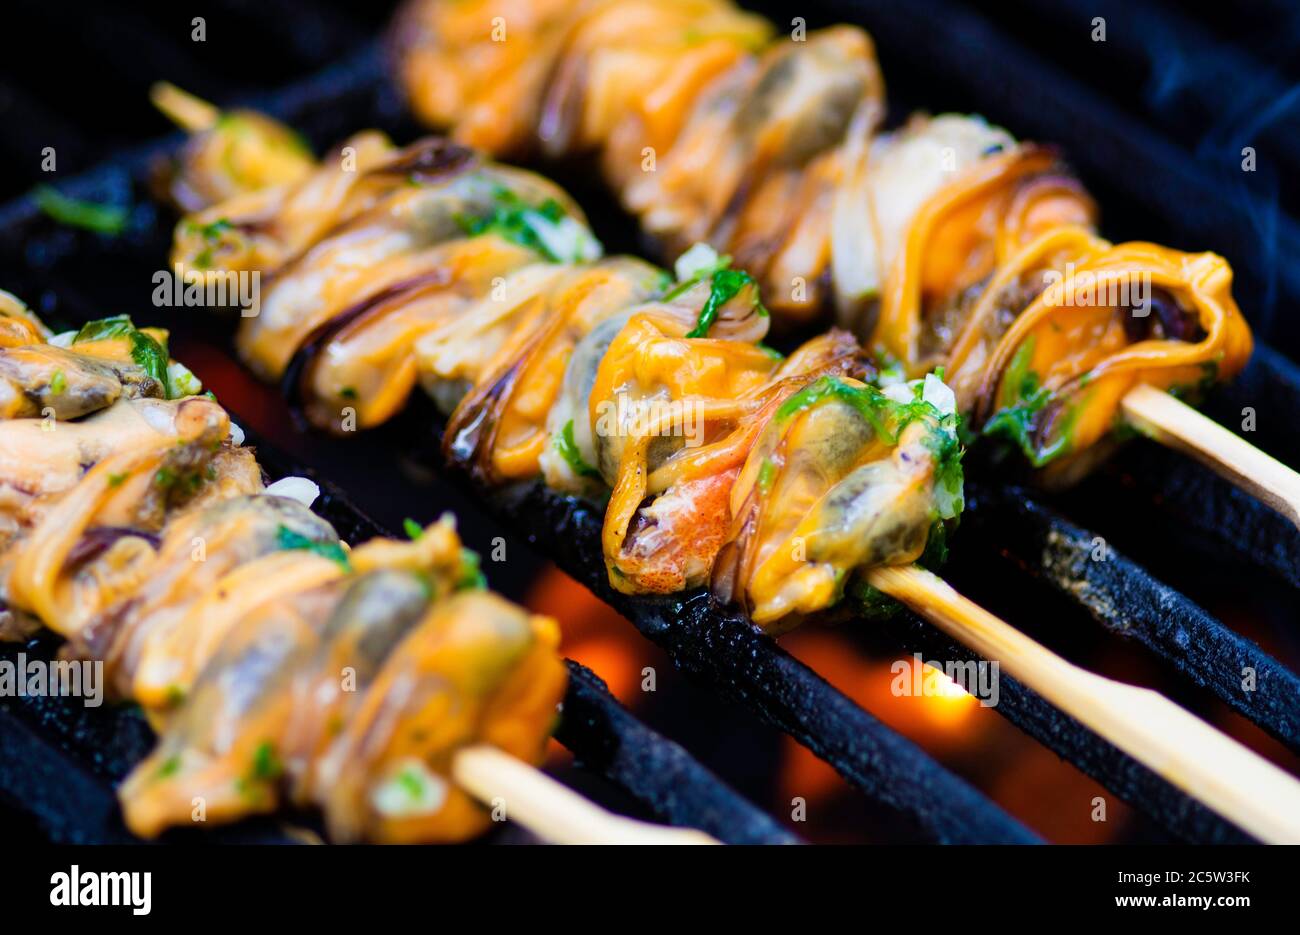 Skewered Garlic Mussels cooked on a Barbecue Stock Photo